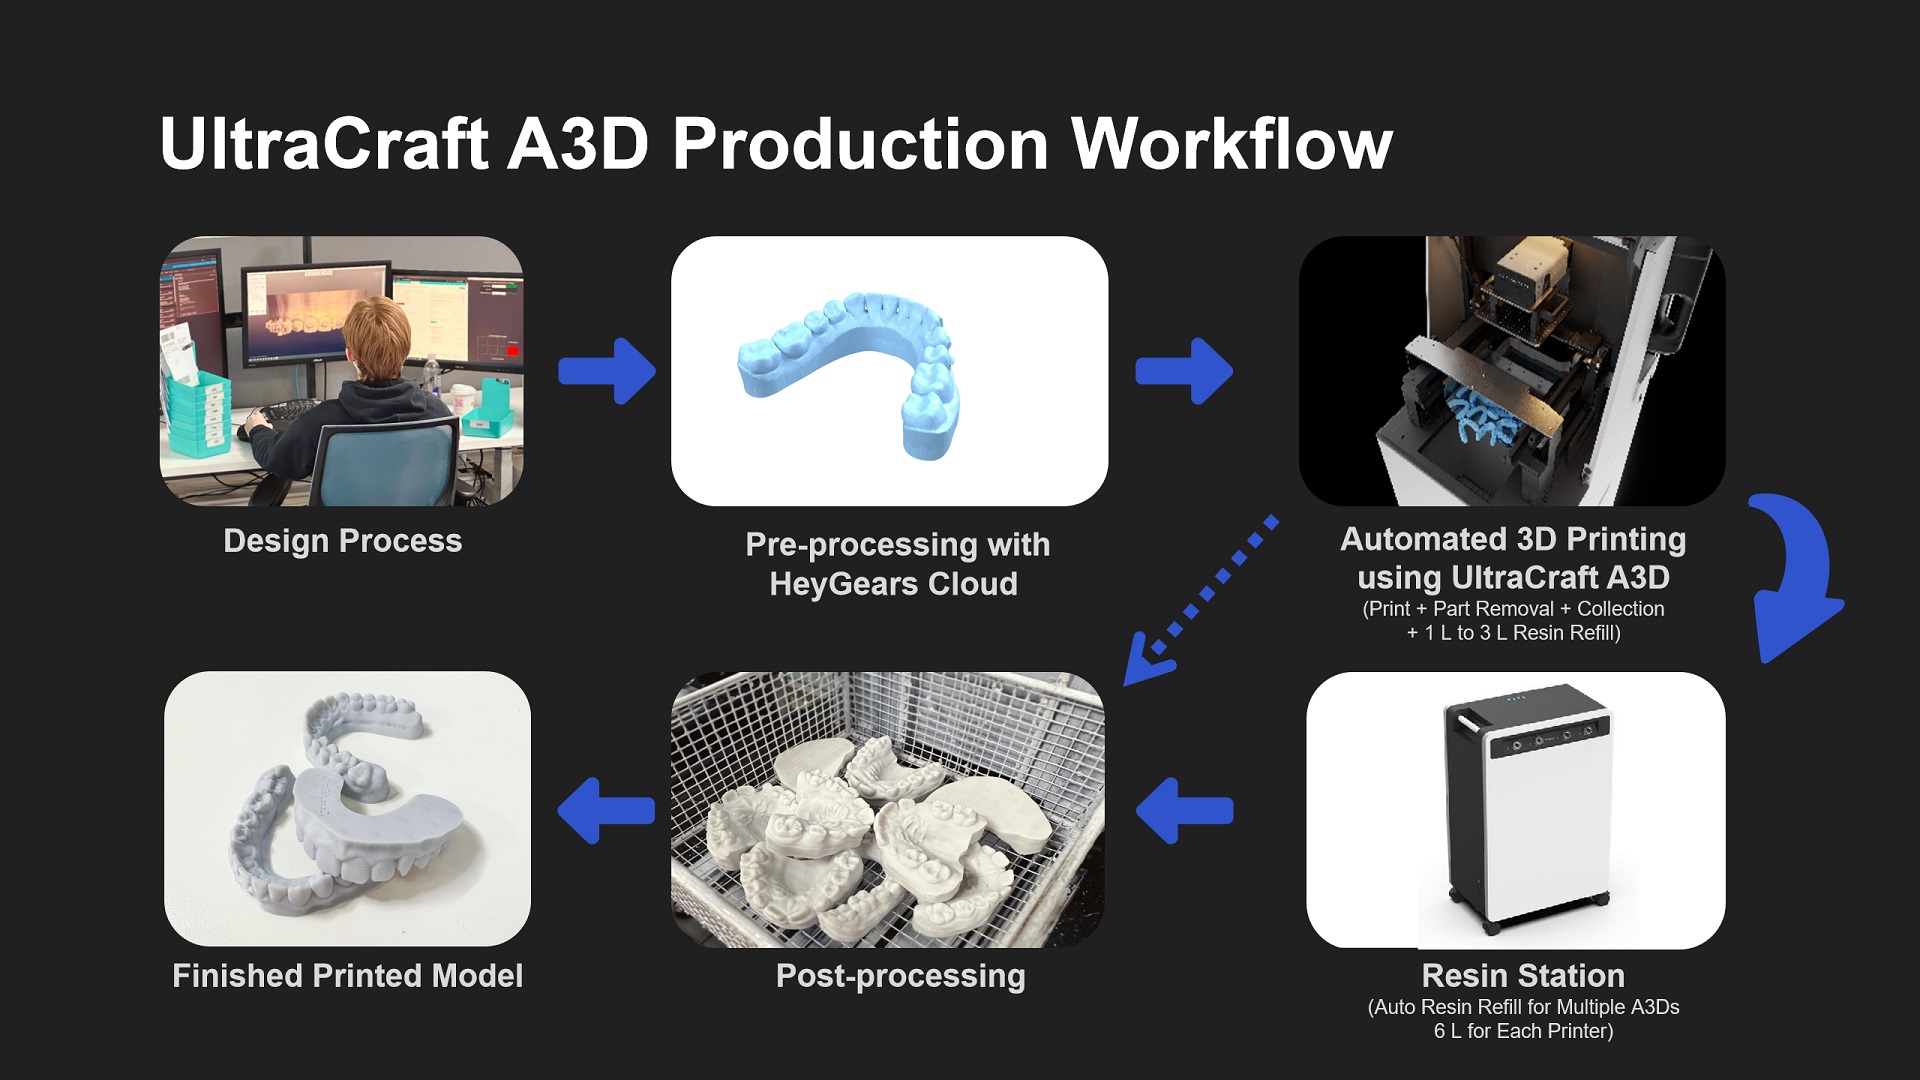 Fig. 4: Full workflow of the UltraCraft A3D printer and Resin Station.